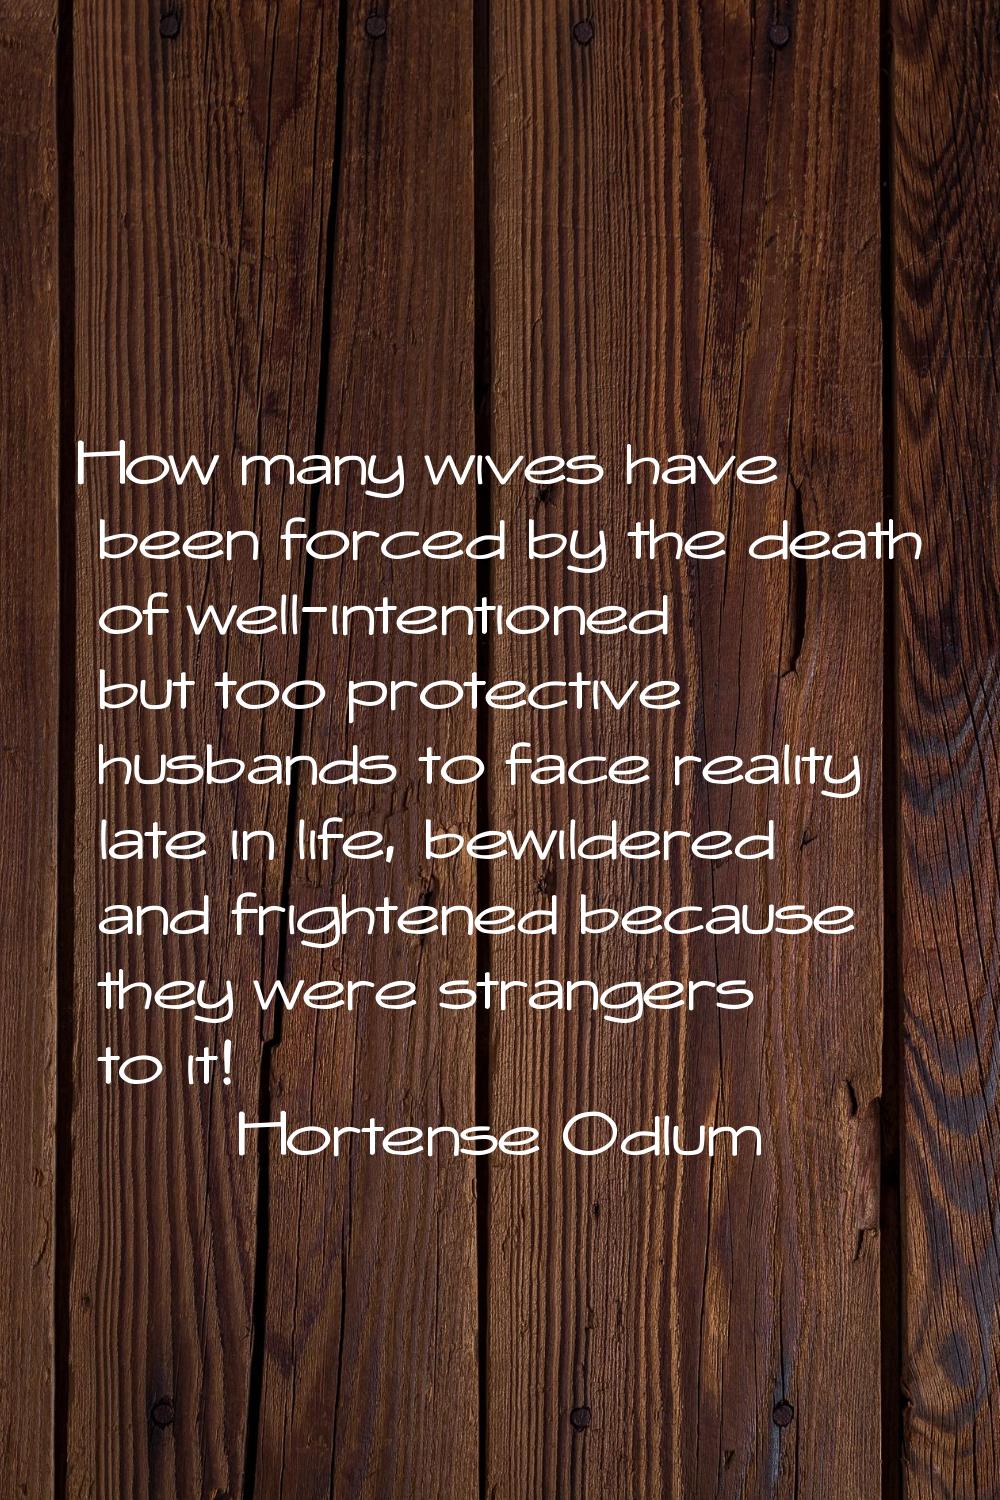 How many wives have been forced by the death of well-intentioned but too protective husbands to fac